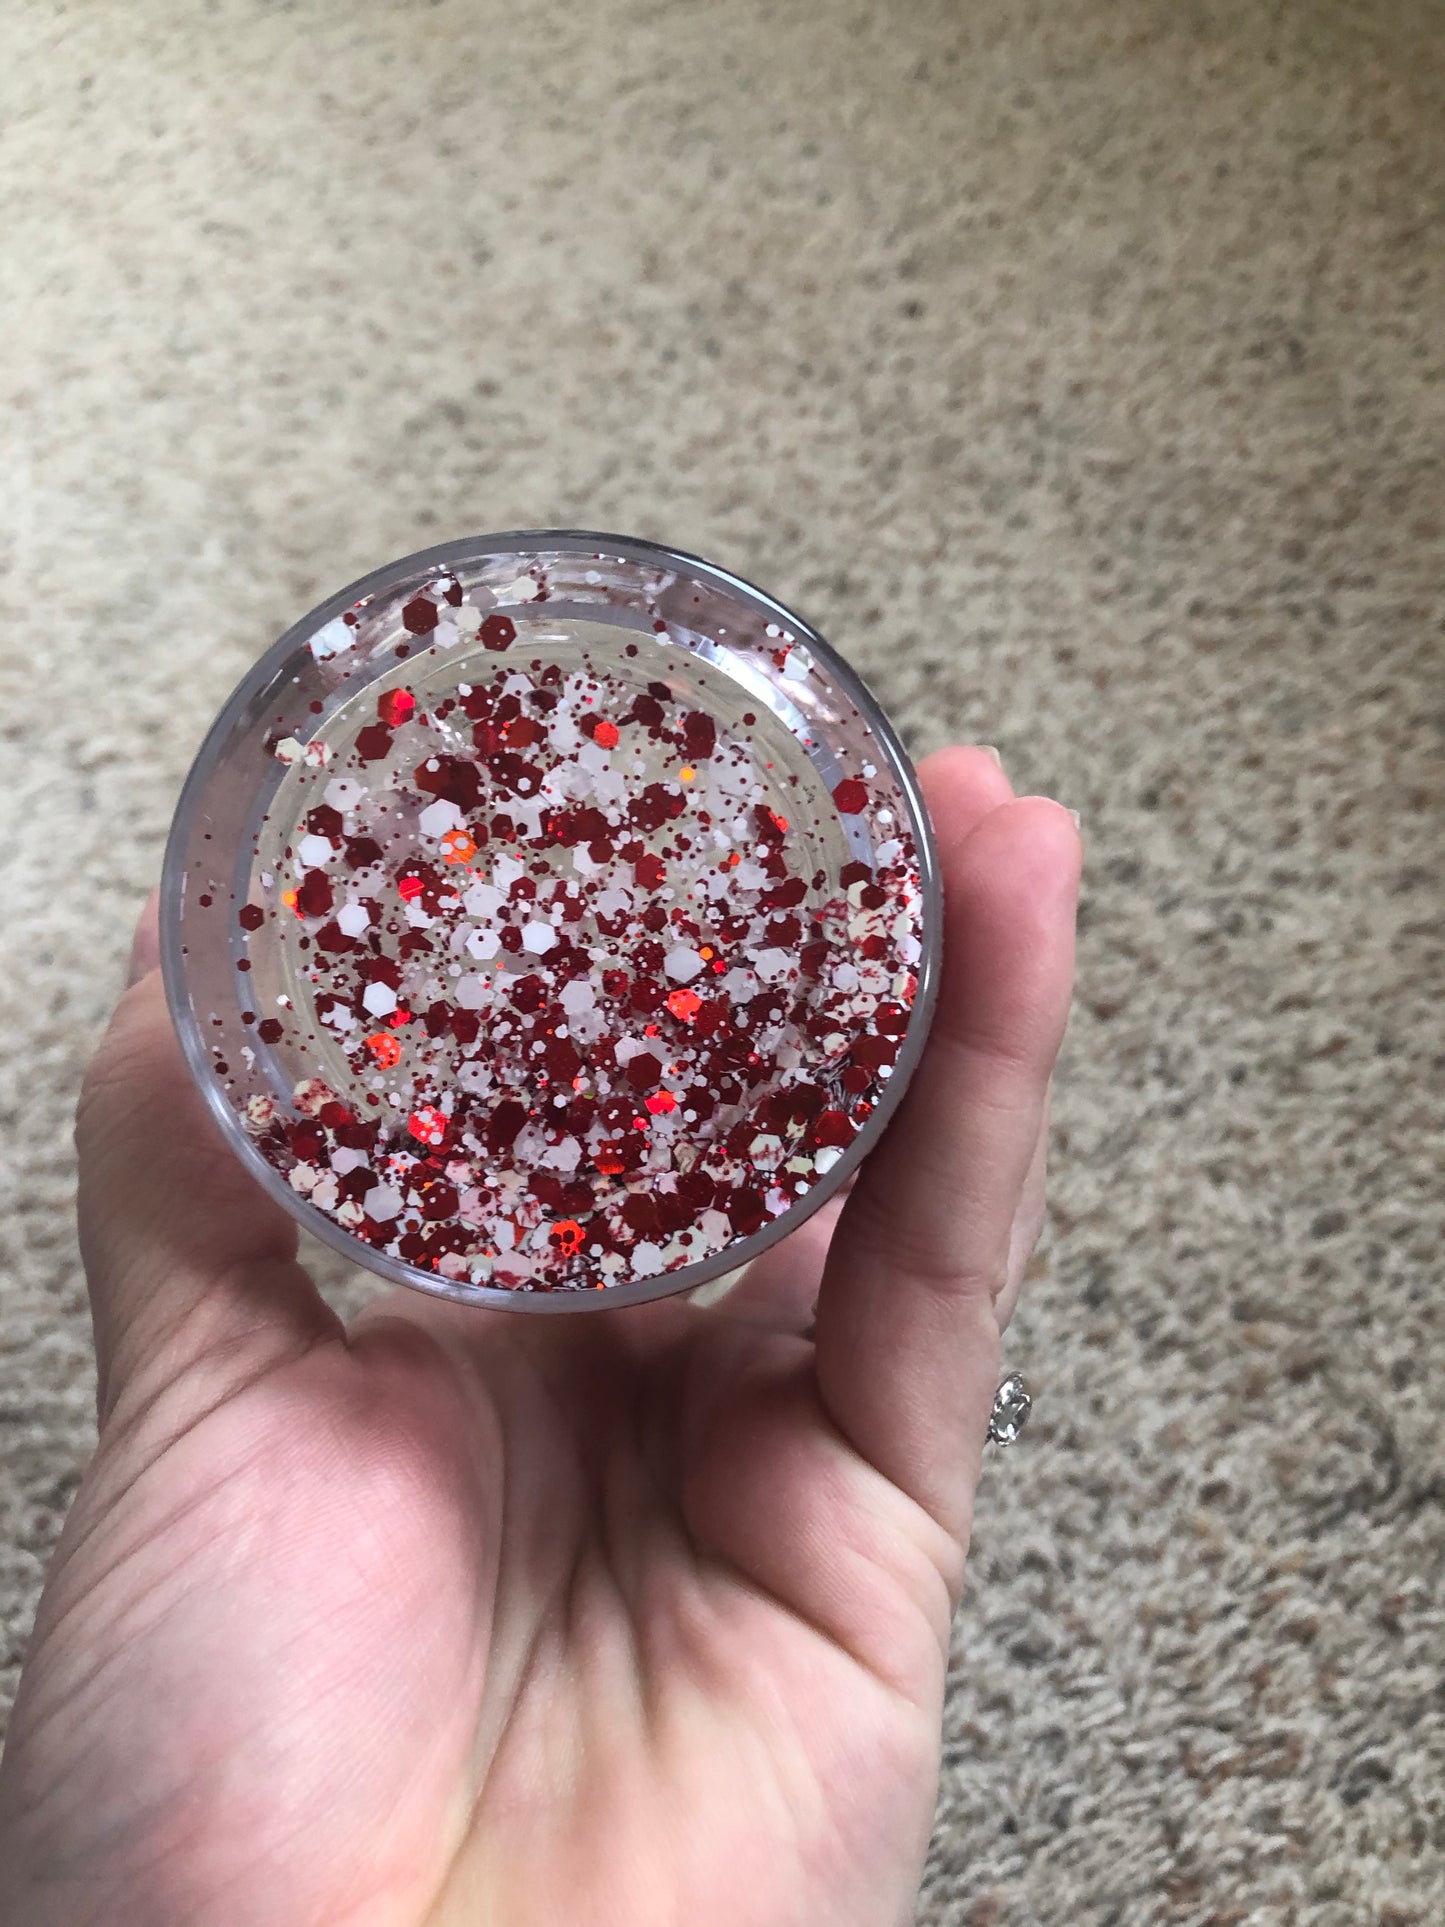 Just the Tip - Michael Myers - Snow Globe or Blood Drip Glitter Tumbler Cup